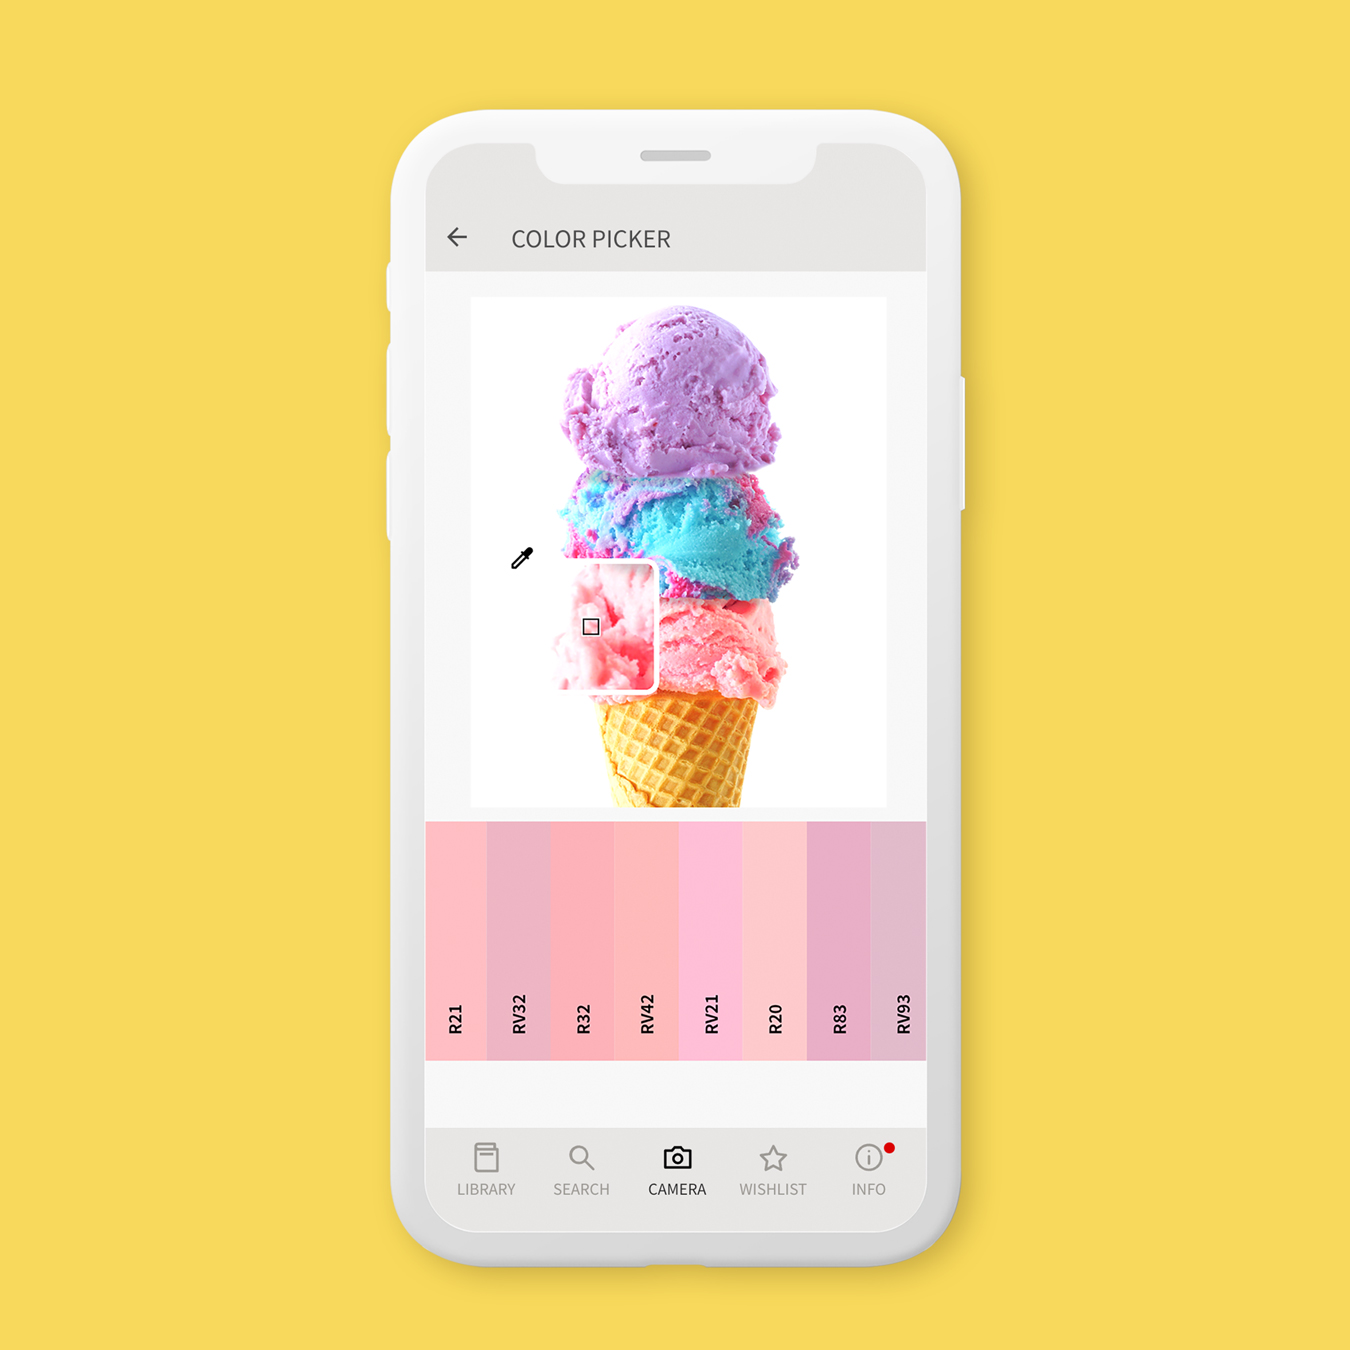 View suggestions with the color picker feature